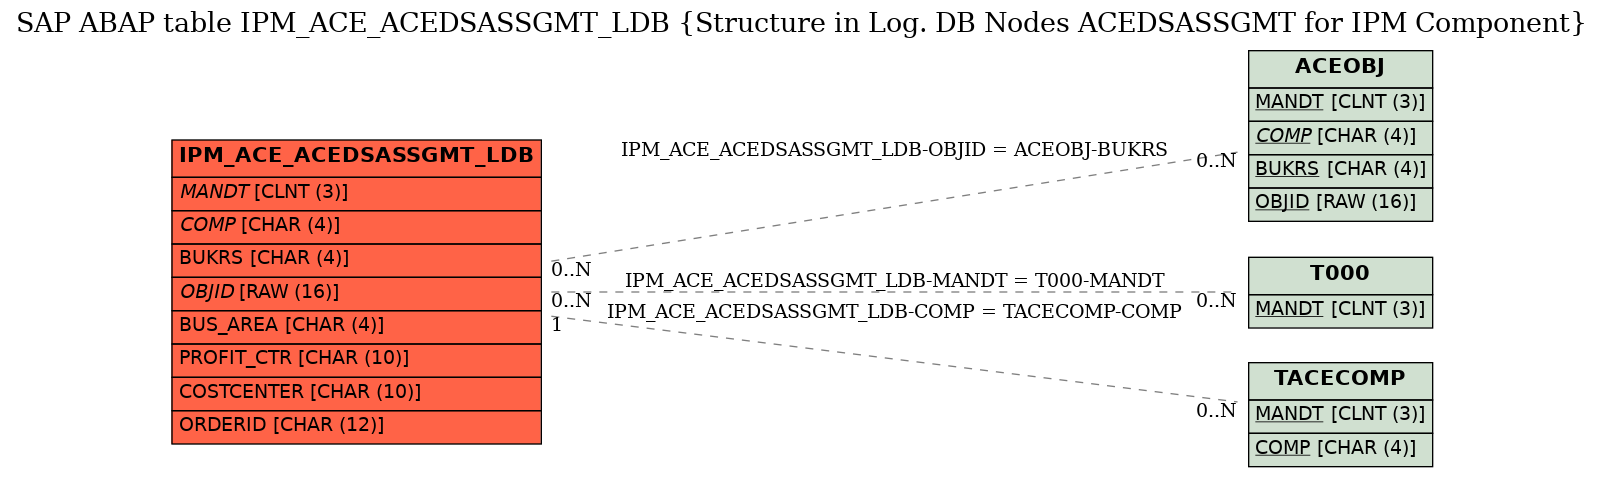 E-R Diagram for table IPM_ACE_ACEDSASSGMT_LDB (Structure in Log. DB Nodes ACEDSASSGMT for IPM Component)